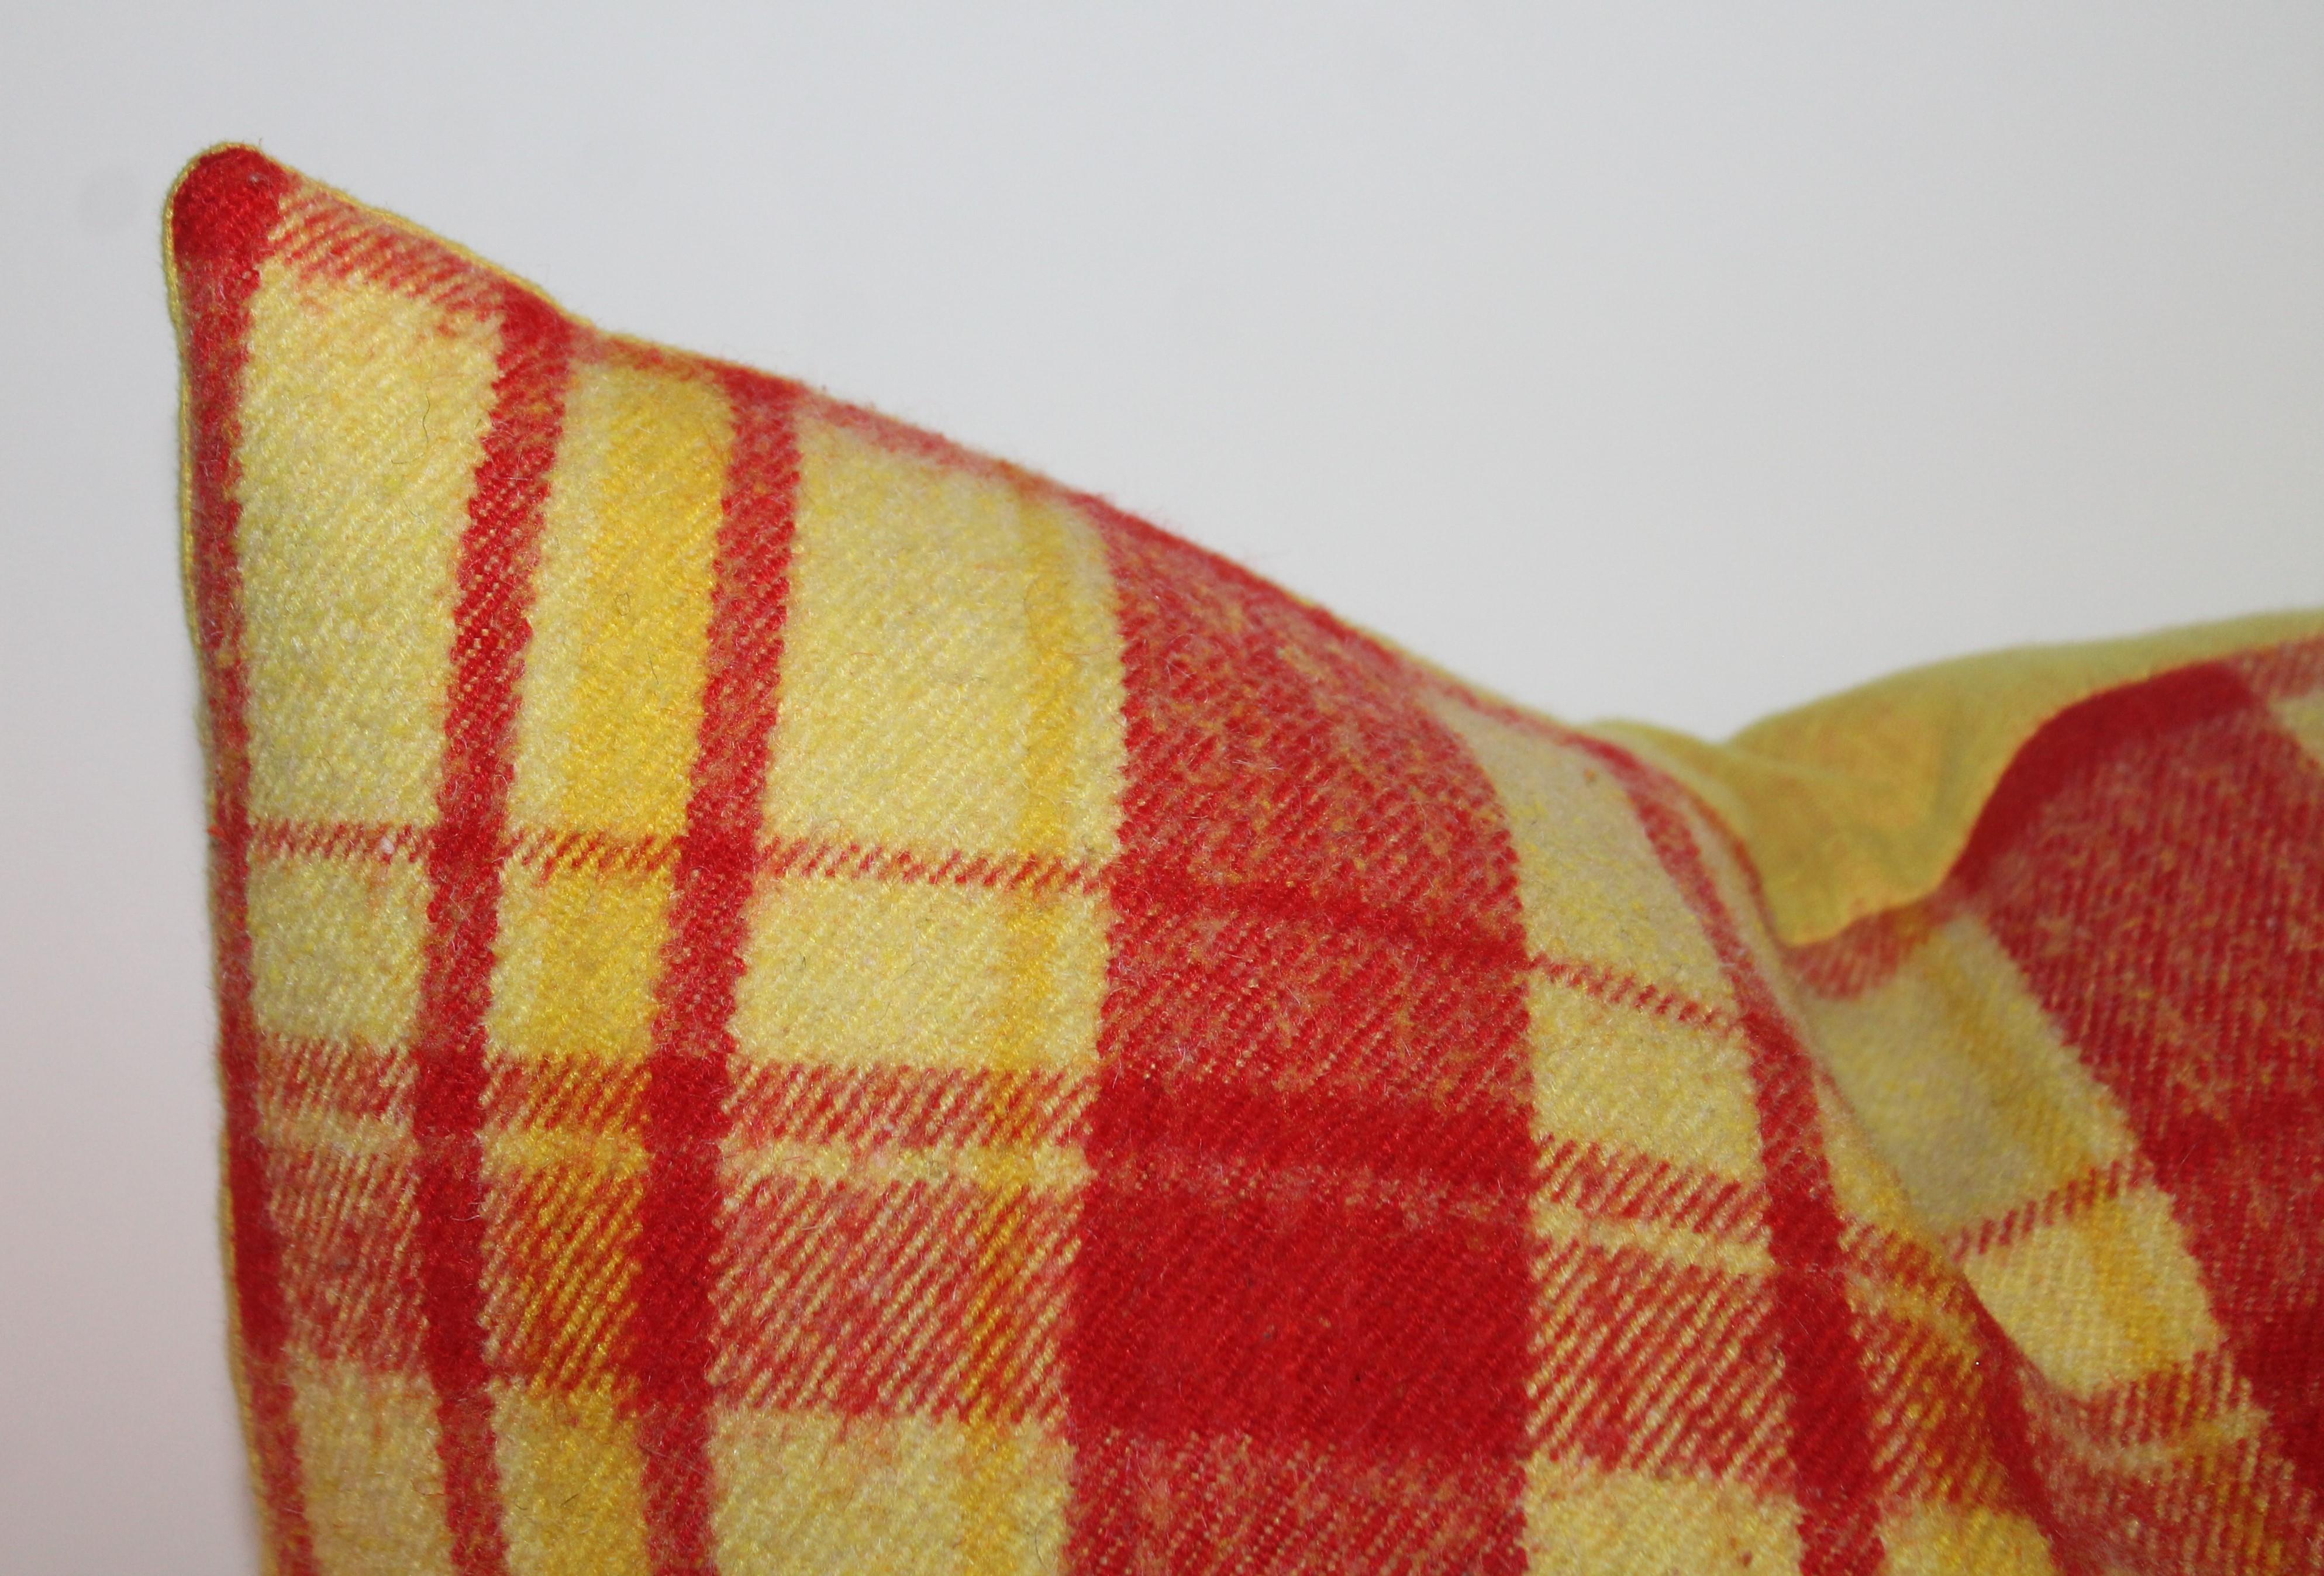 Country Plaid Wool Blanket Pillows, Pair For Sale